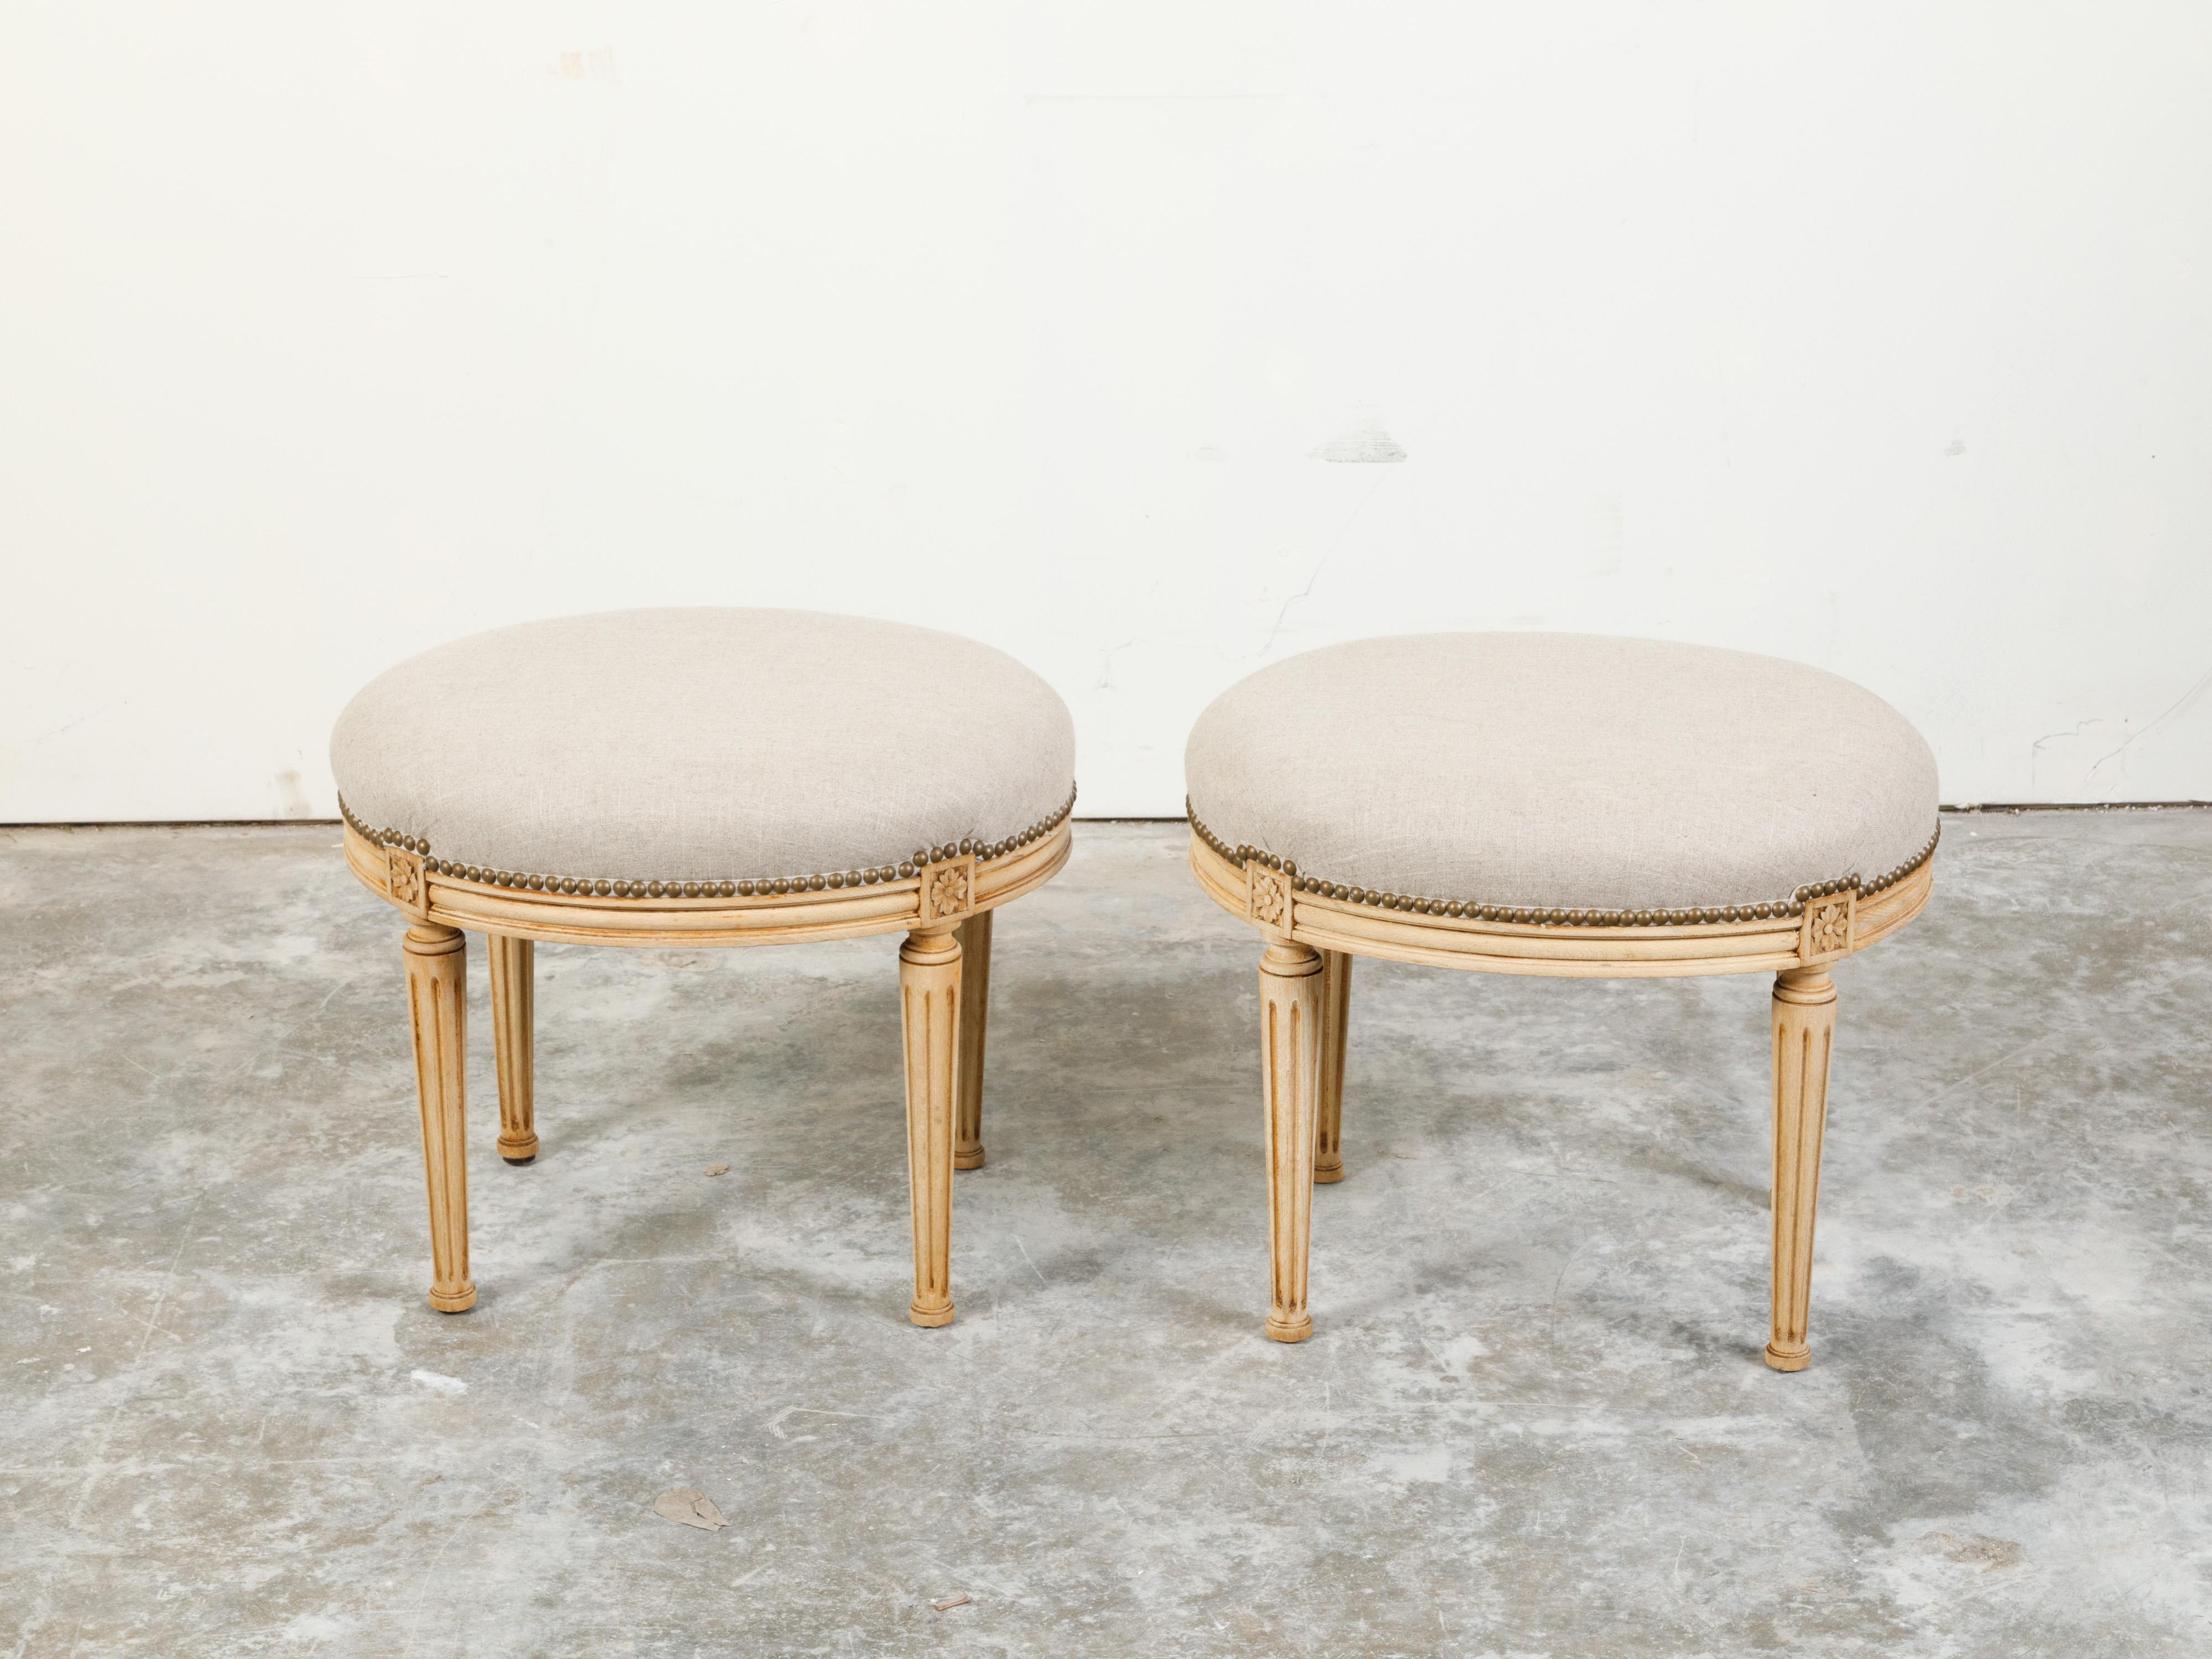 20th Century Pair of French Neoclassical Style Bleached Wood Stools with New Upholstery For Sale